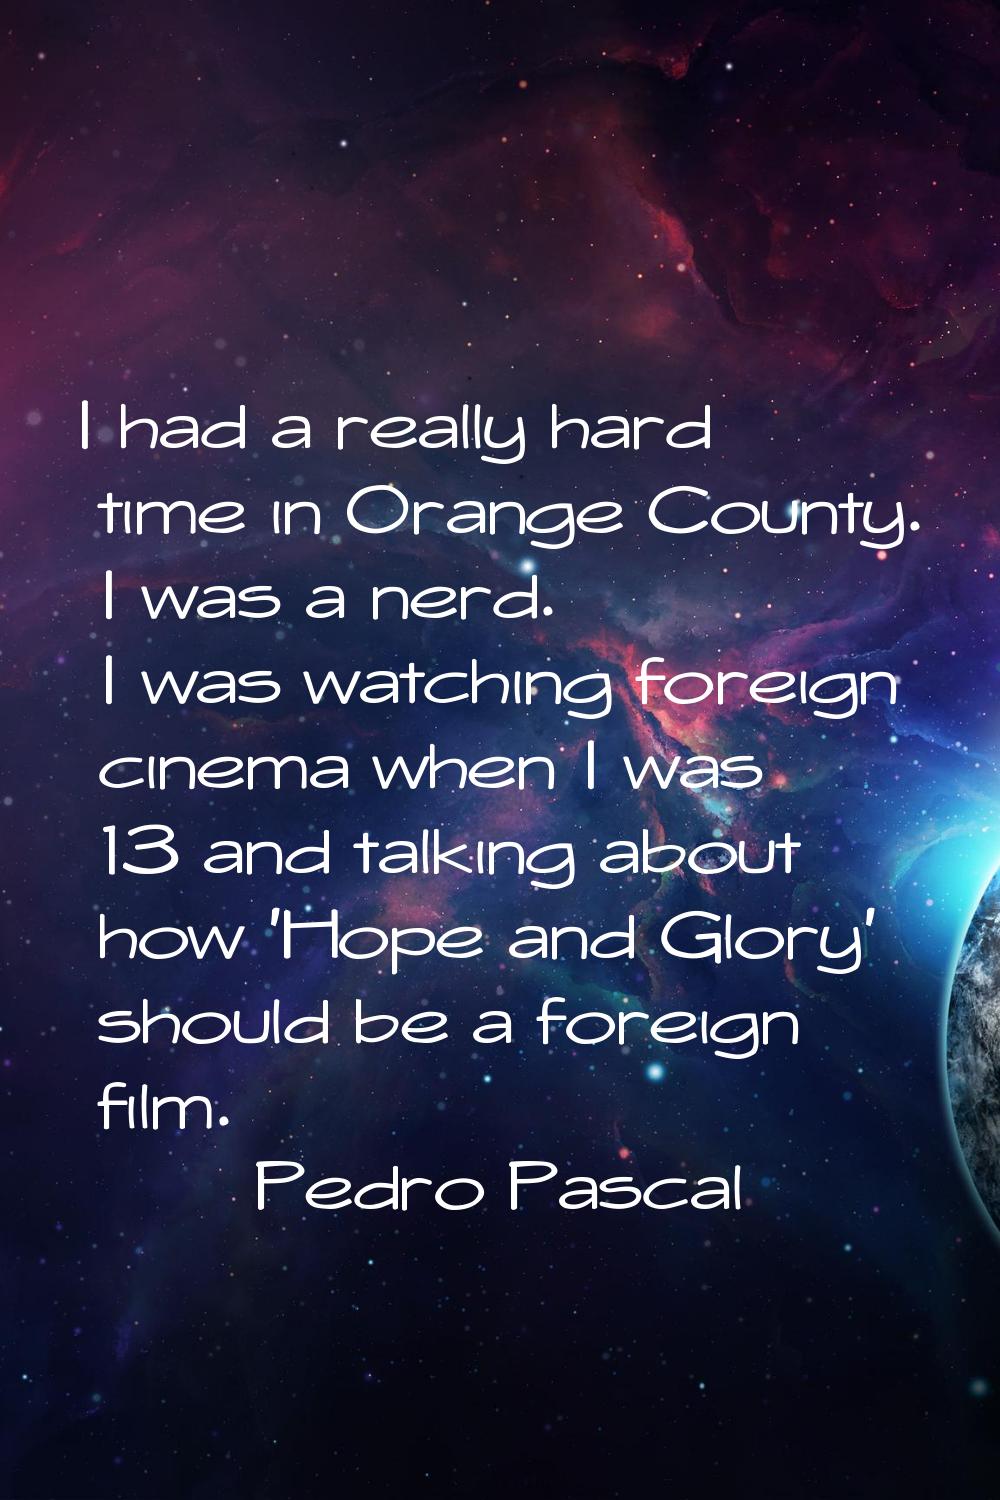 I had a really hard time in Orange County. I was a nerd. I was watching foreign cinema when I was 1